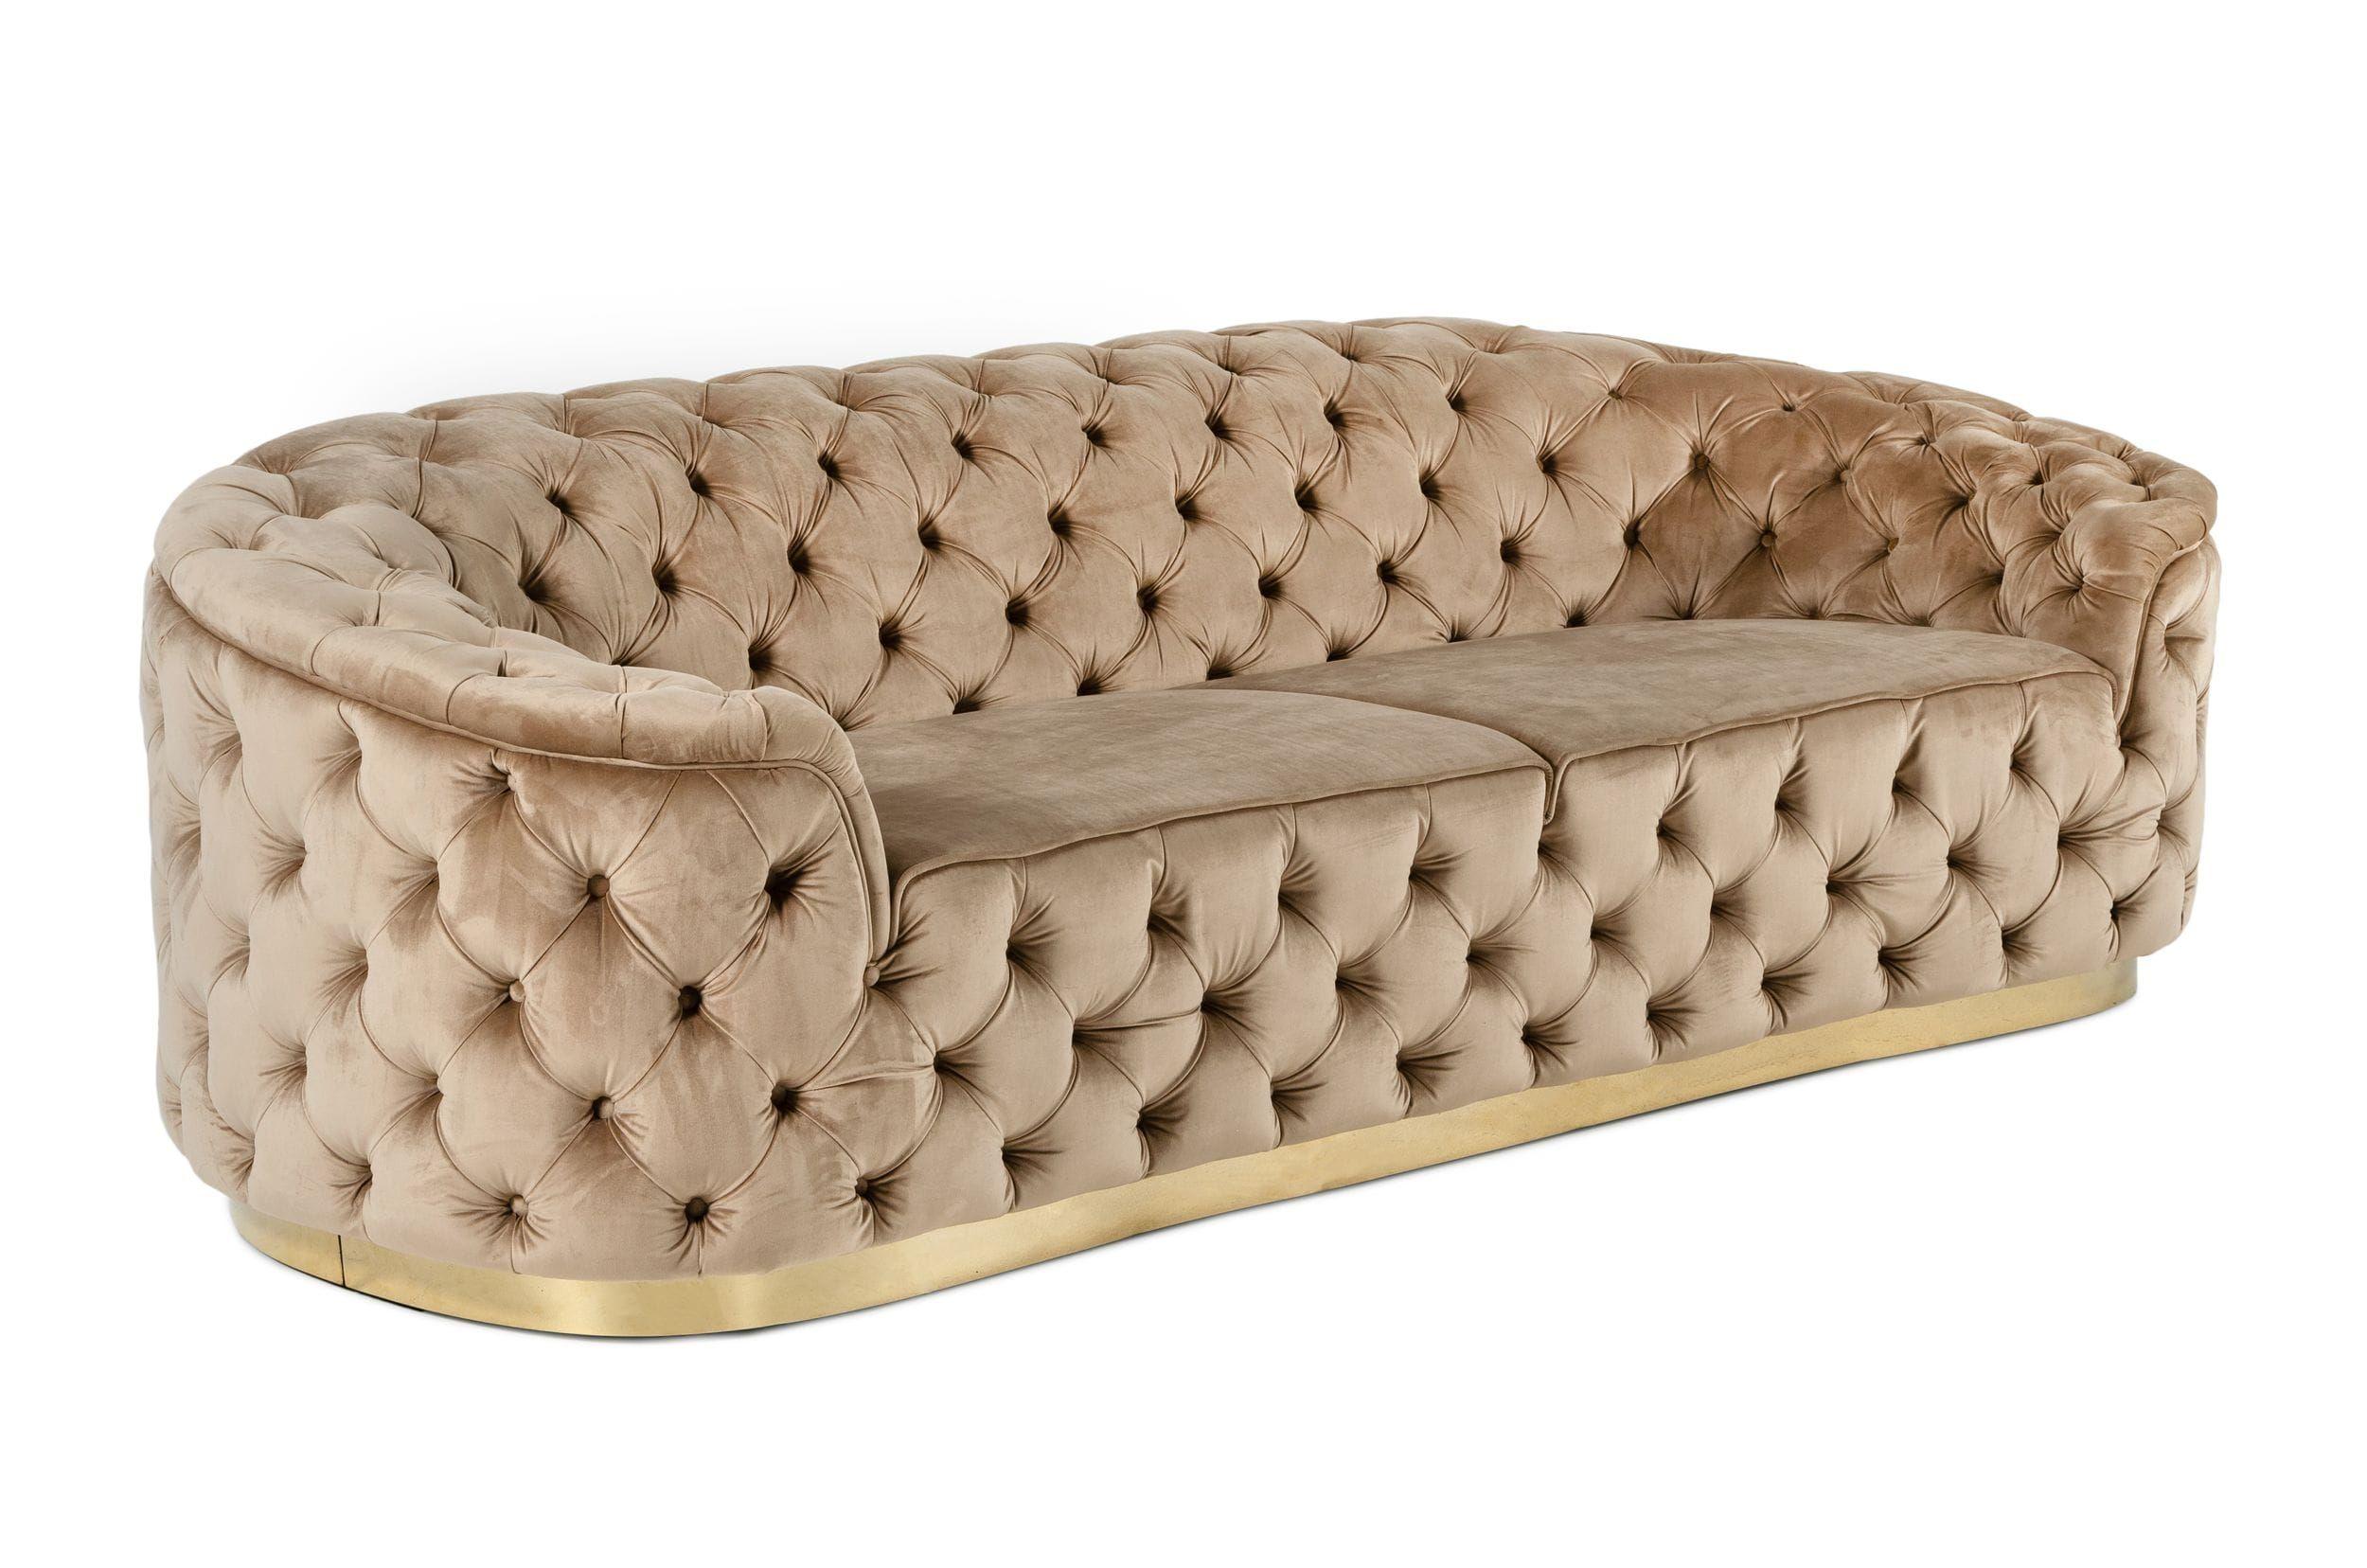 Contemporary, Modern Sofa VGUIMY529 VGUIMY529 in Gold, Beige Fabric